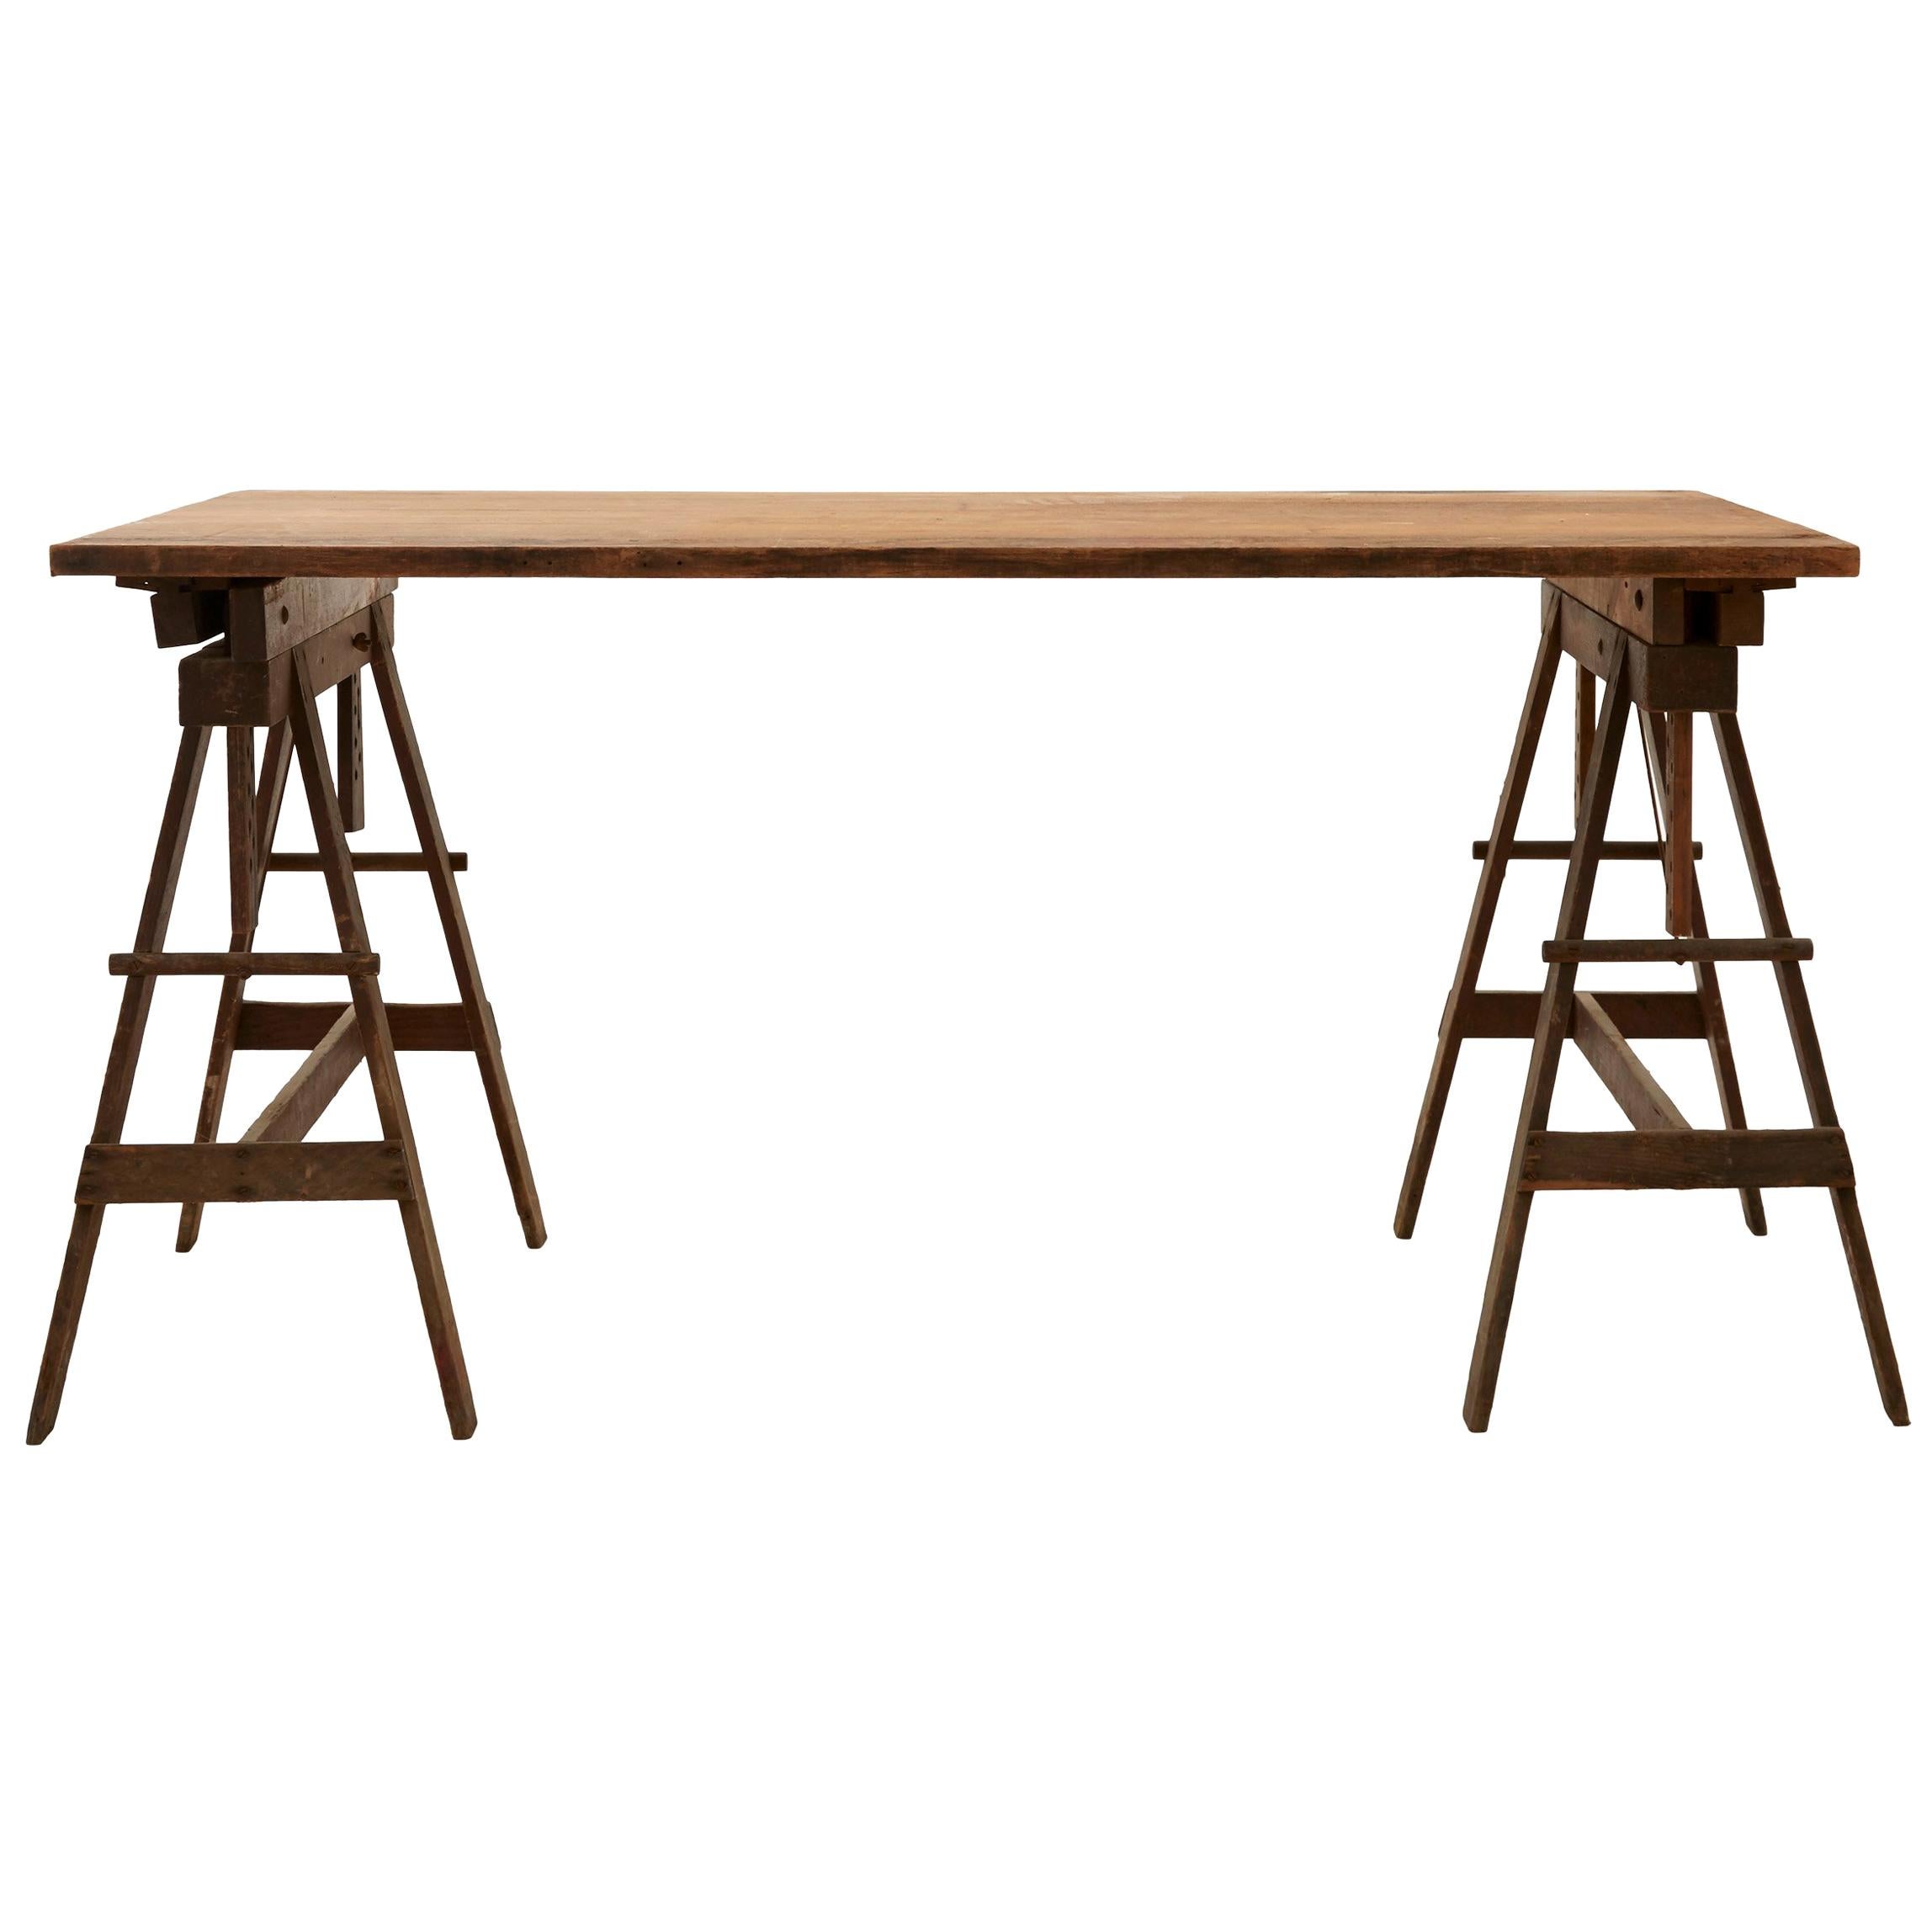 Wooden Industrial Drafting Table